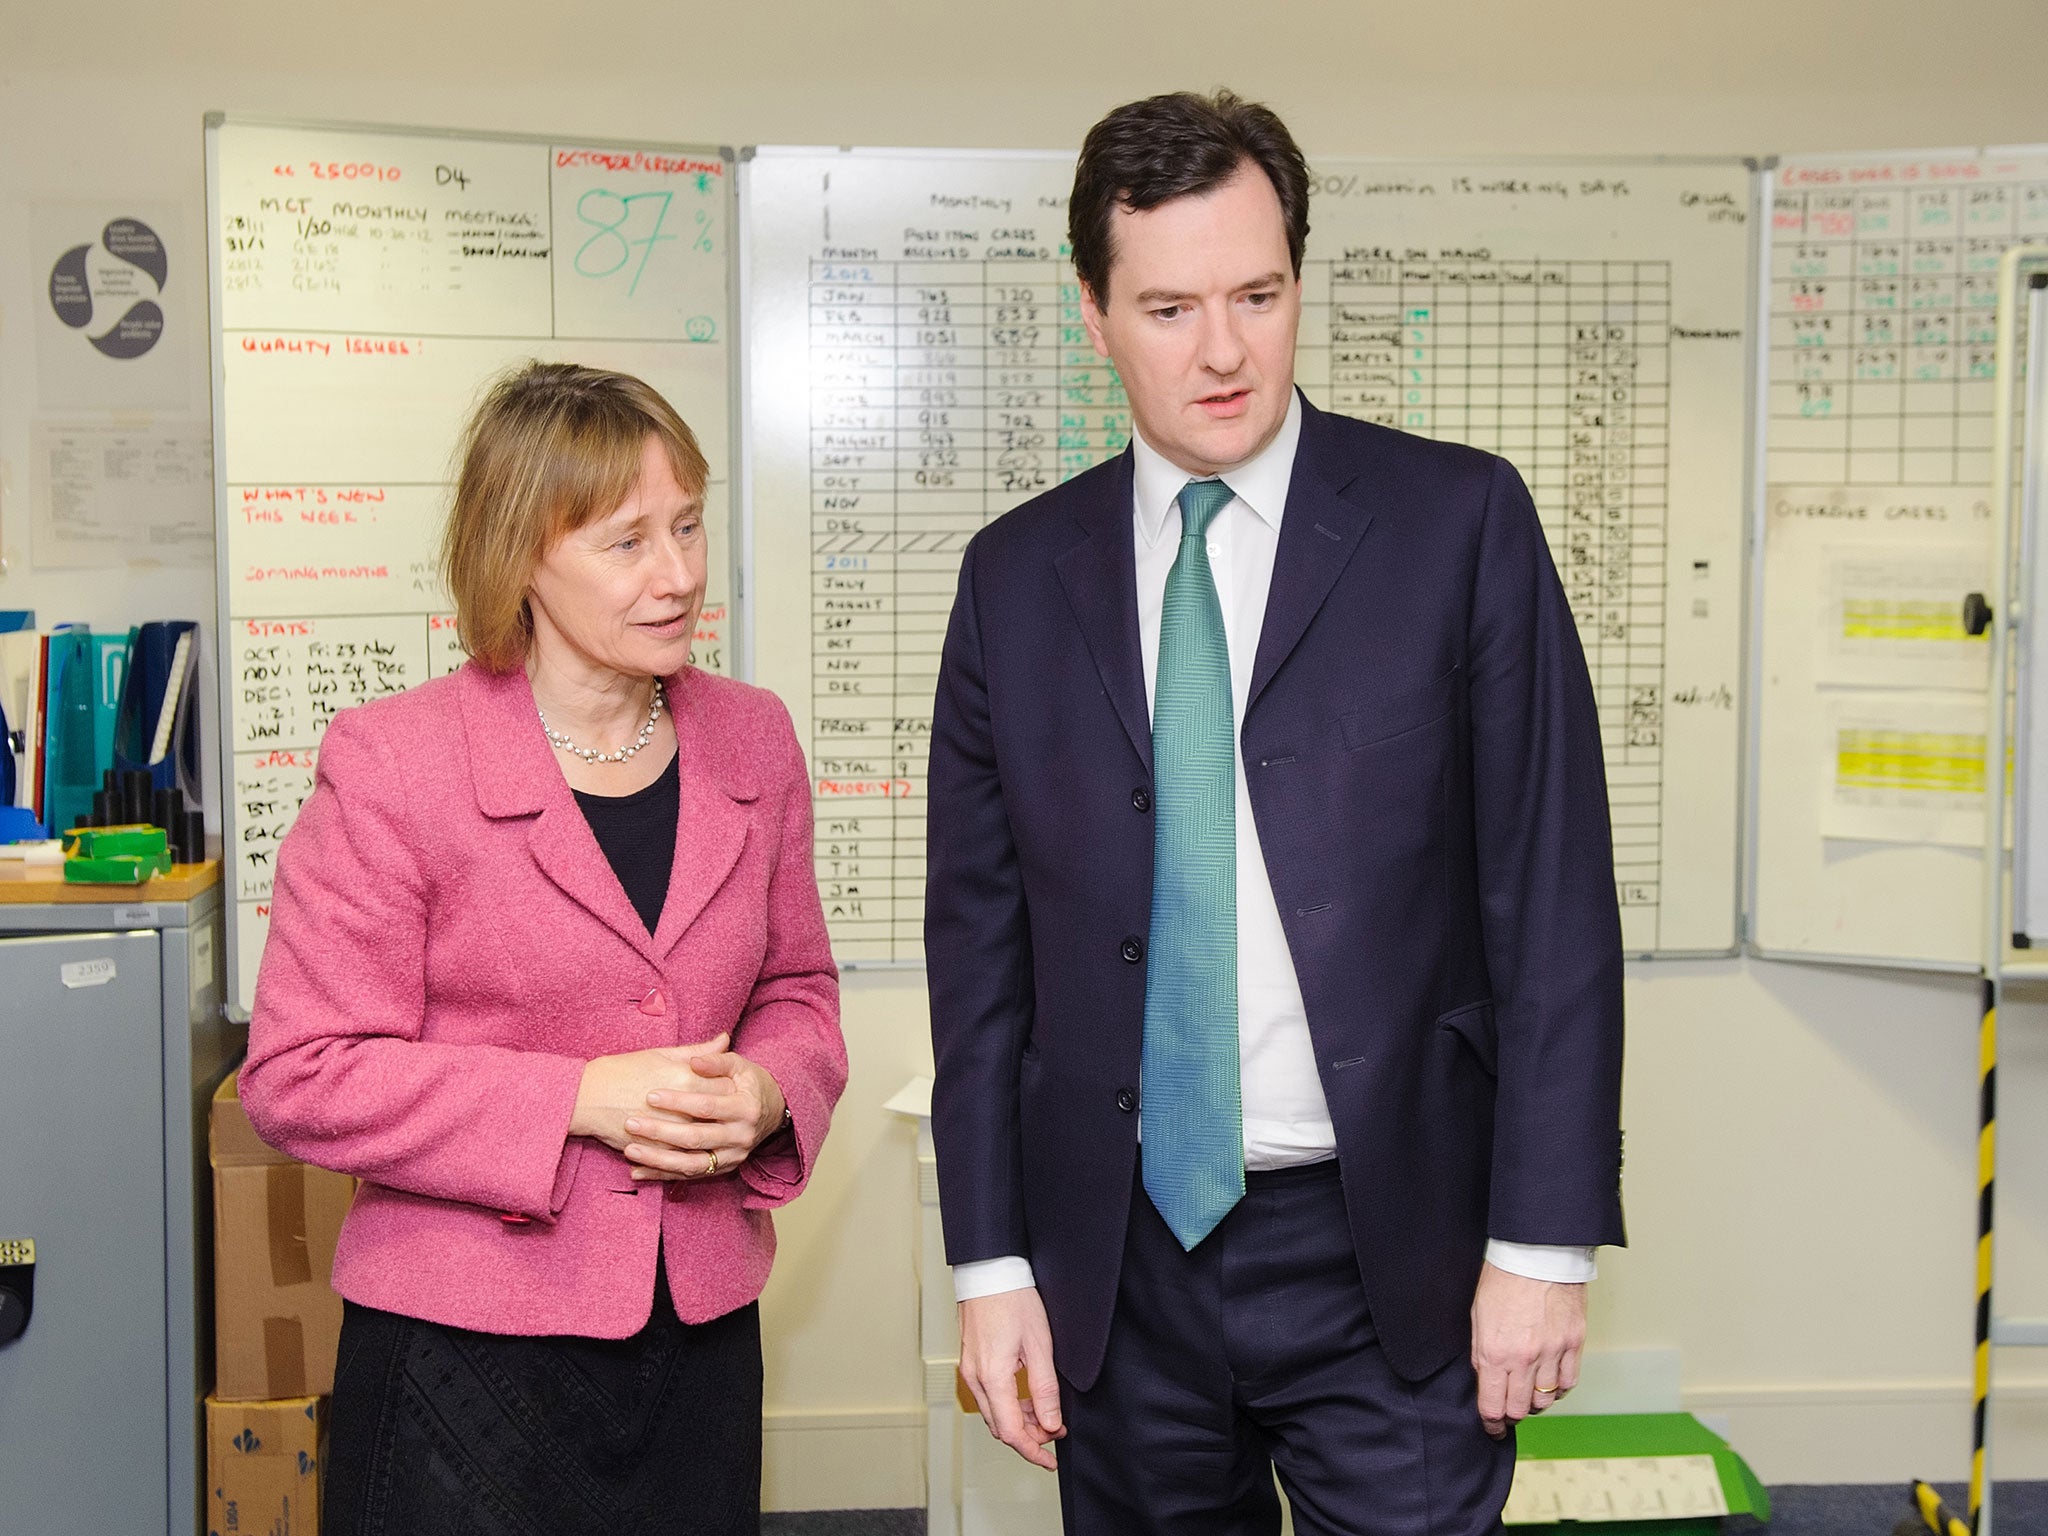 Lin Homer with the Chancellor, George Osborne, in 2012